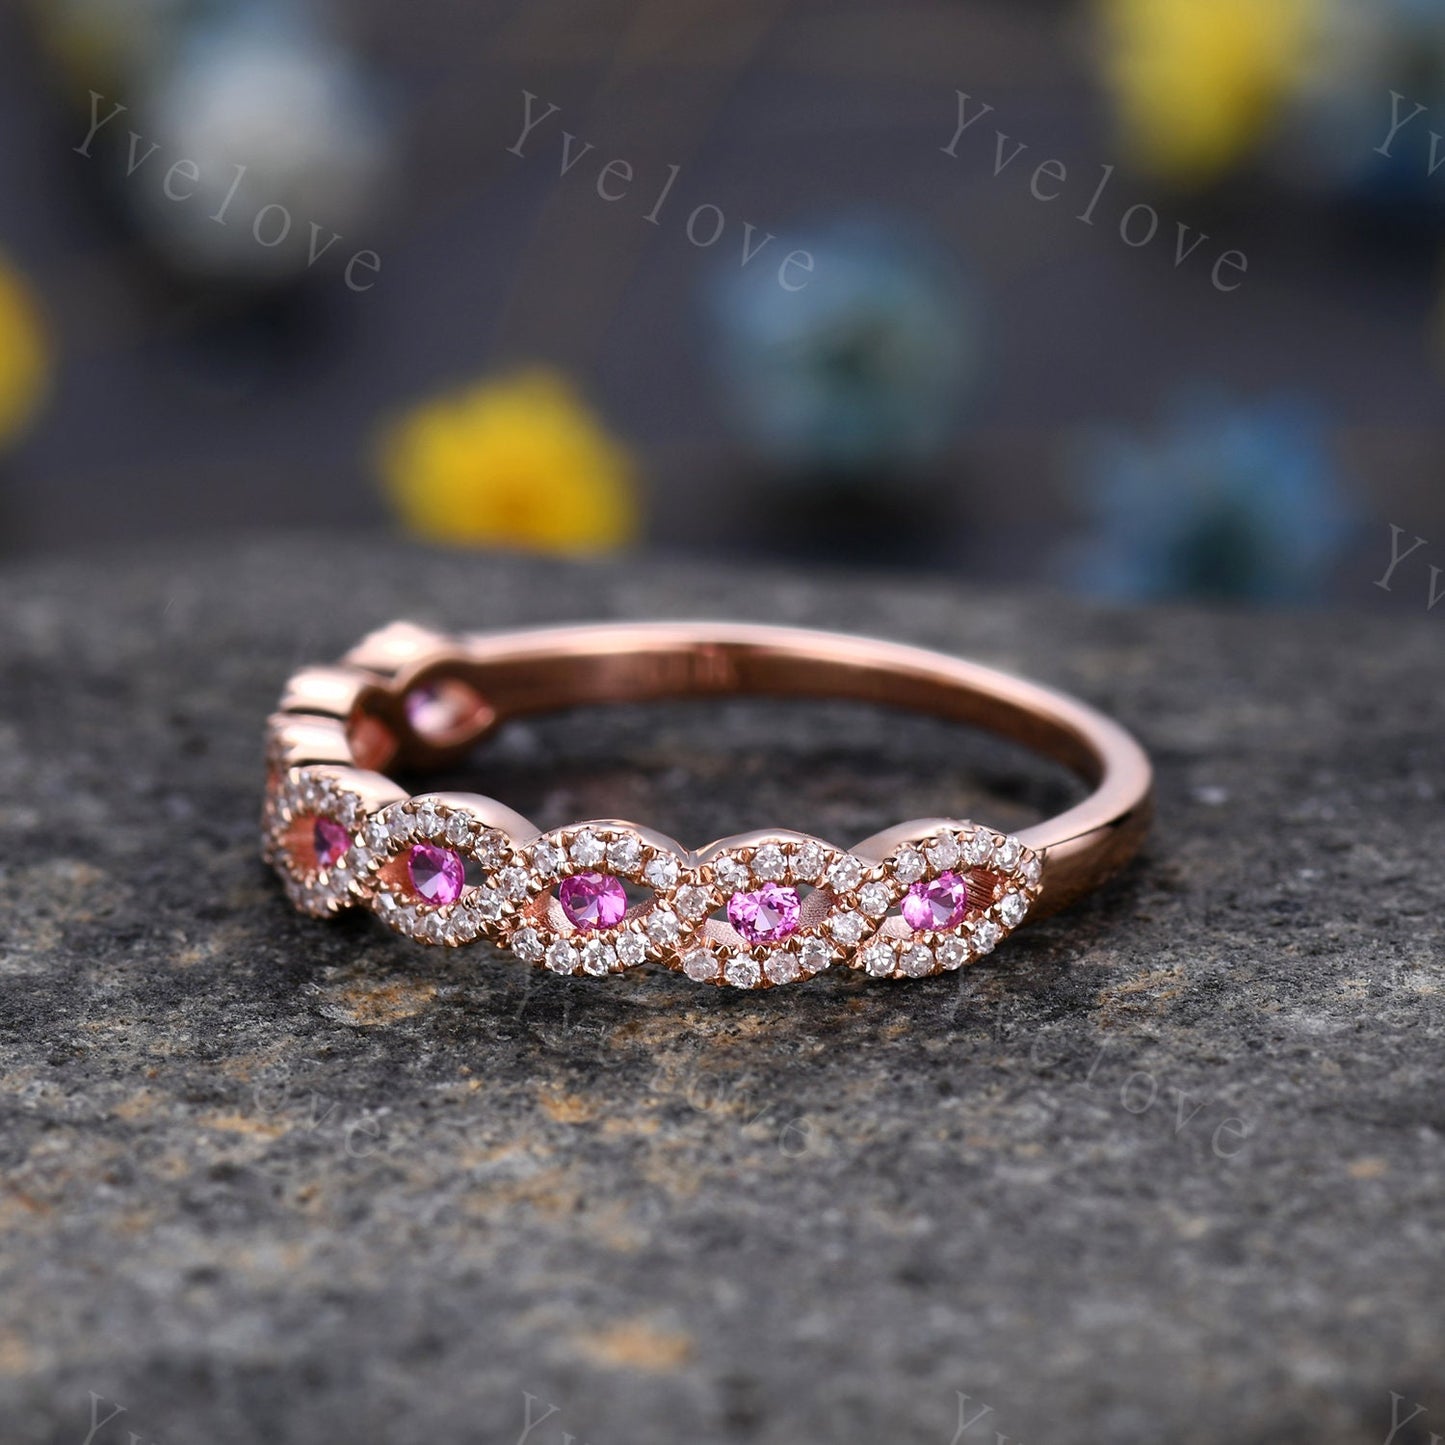 Pink sapphire wedding ring,vintage moissanite engagement band,unique wedding band, stacking band rose gold band,birthstone rings,customized